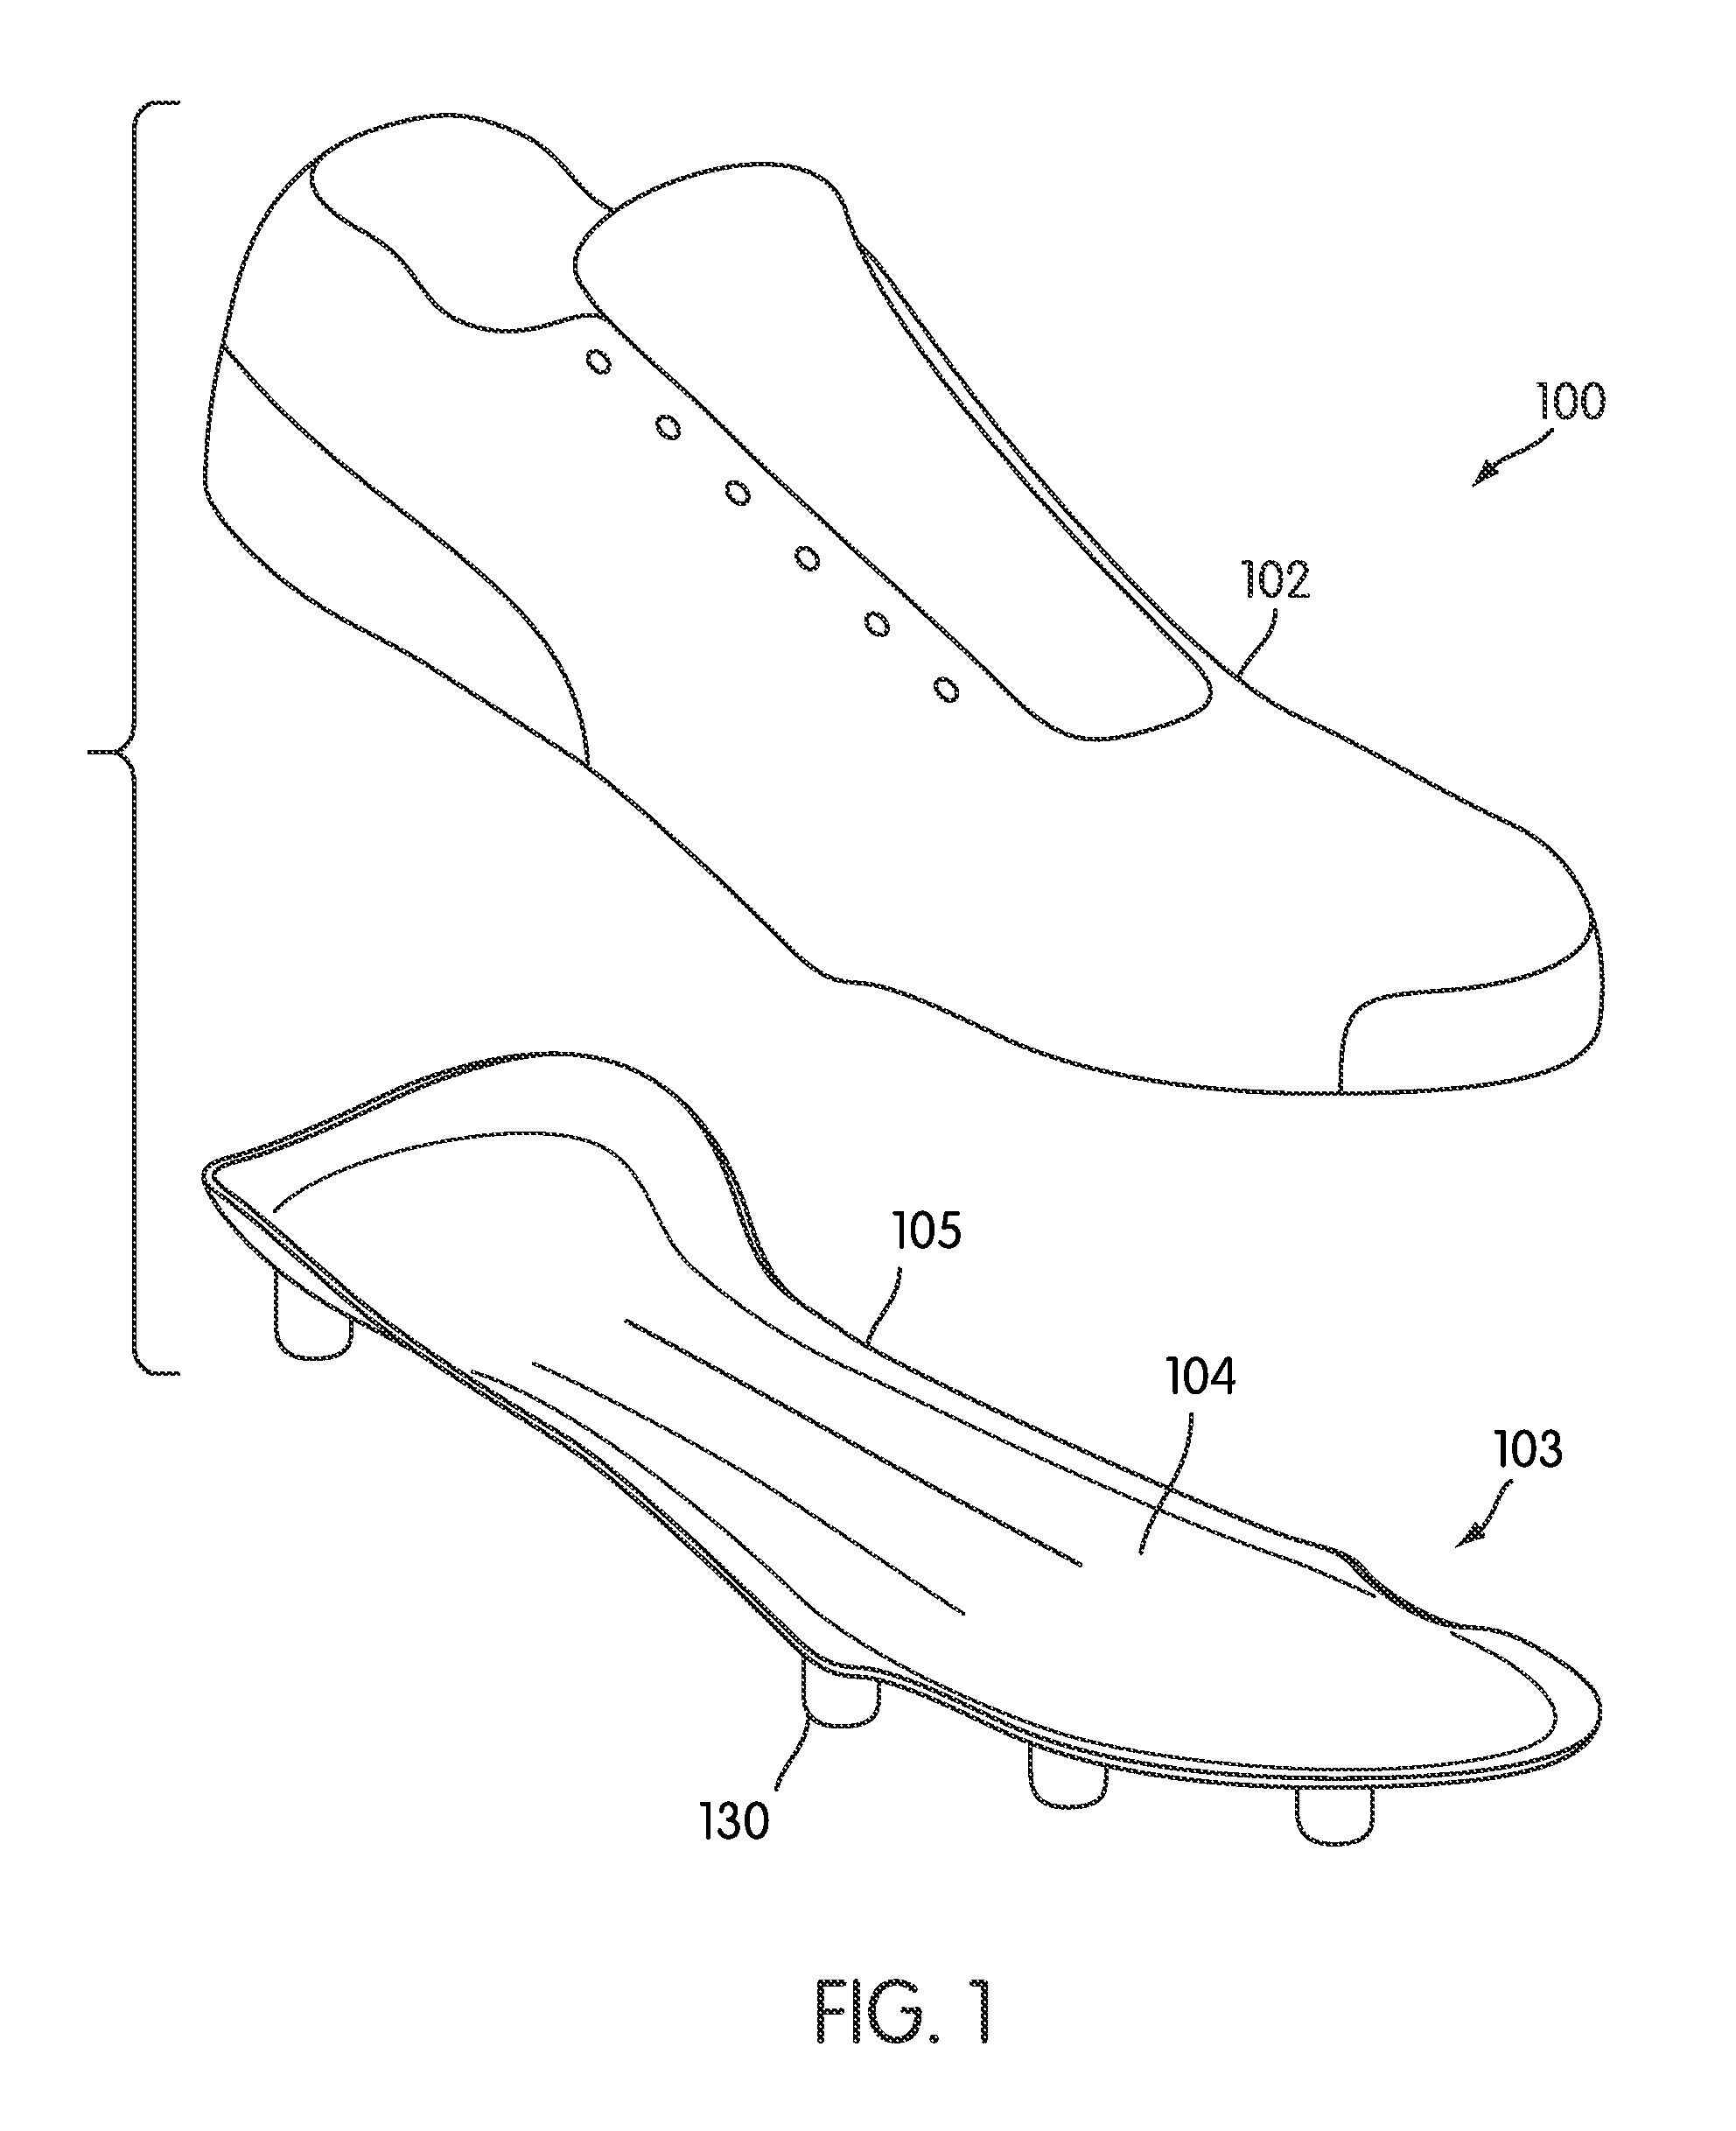 Article of footwear including full length composite plate